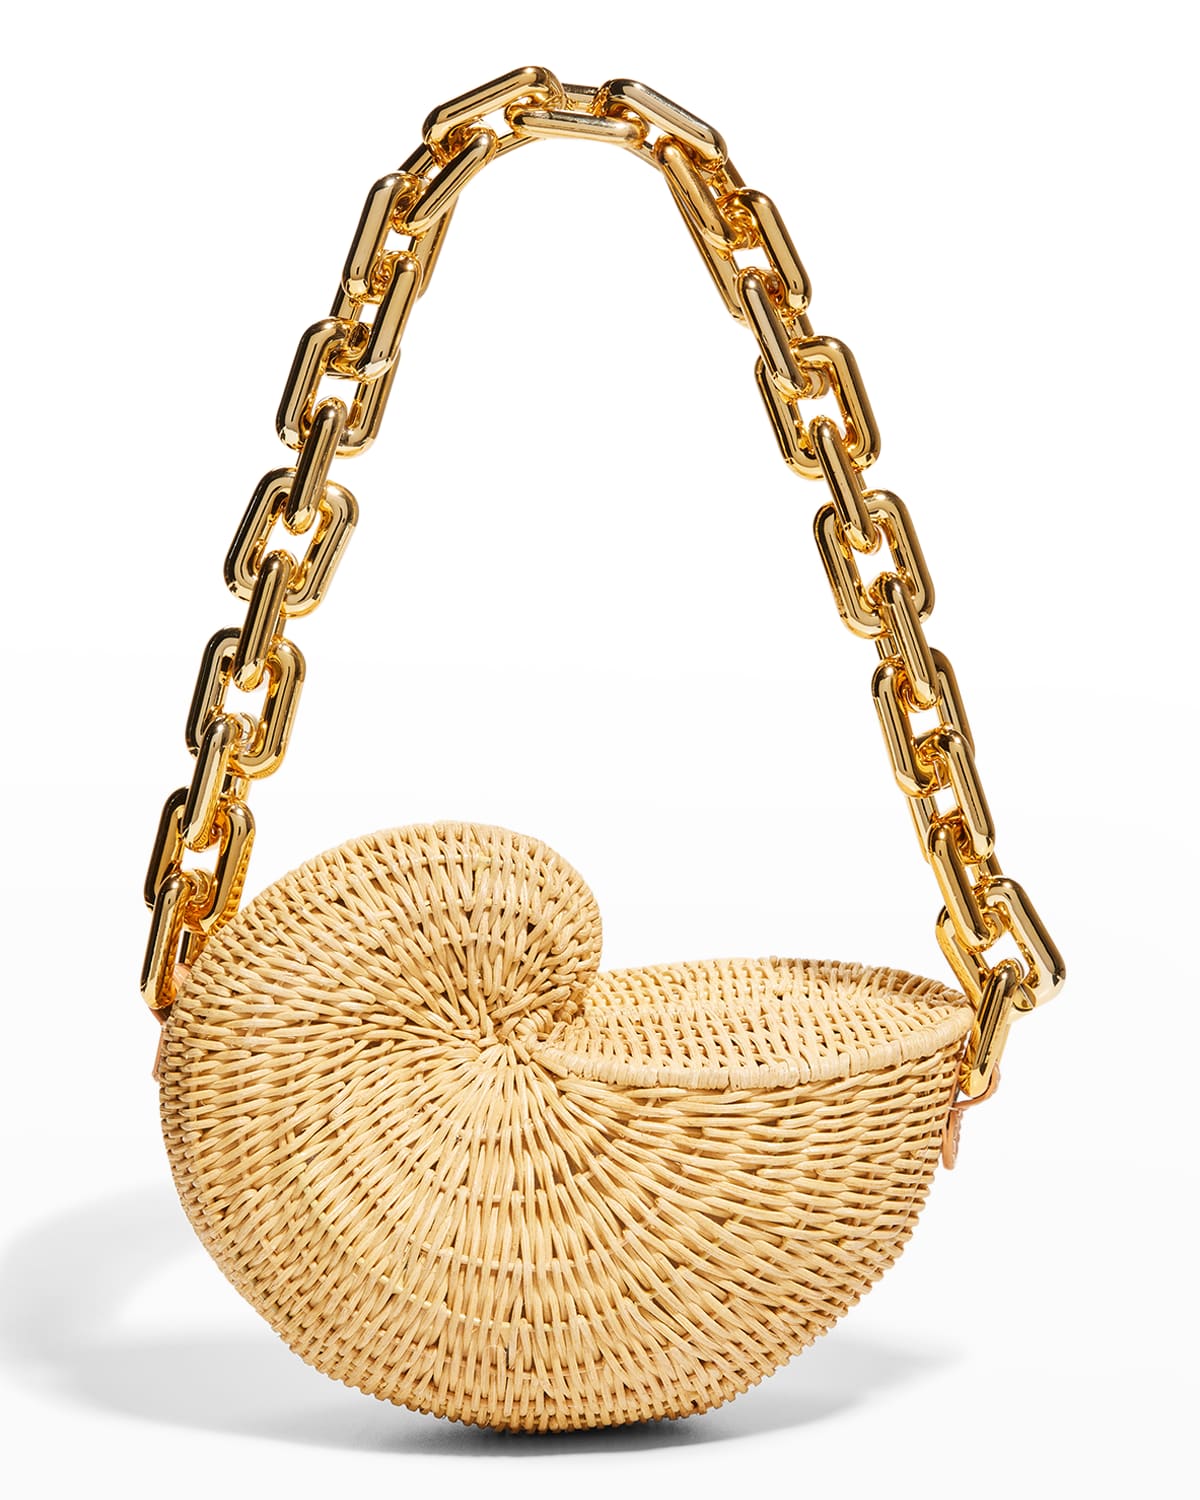 POOLSIDE THE ANNA CONCH SHELL SHOULDER BAG